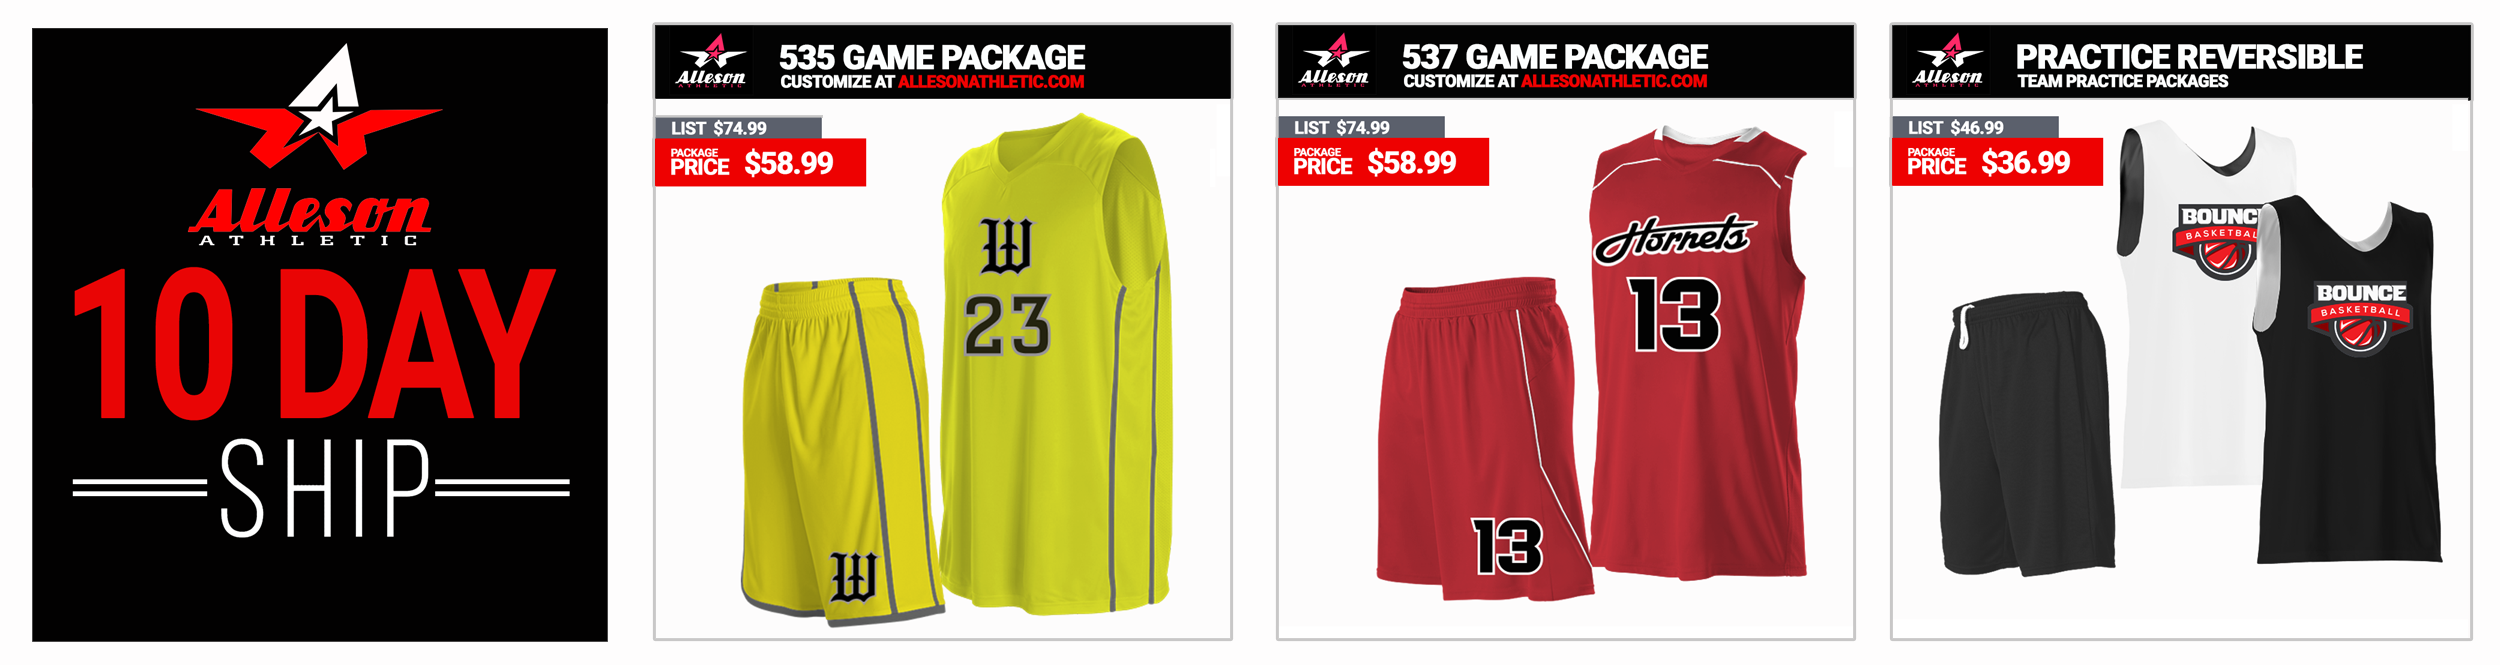 Shop Basketball Team Sales and Uniforms Online at Low Prices ProPlayerSupply.com